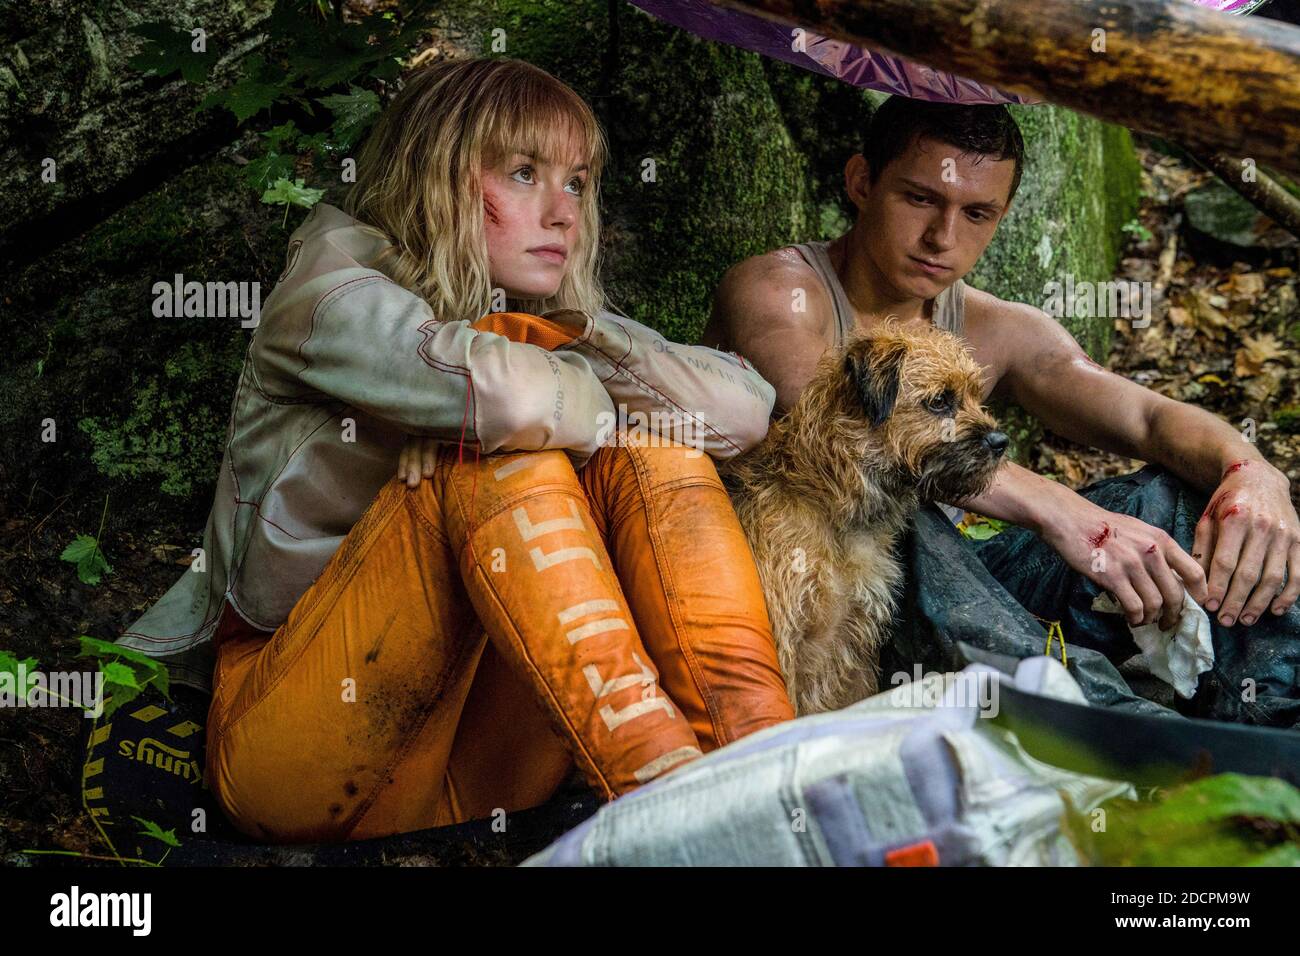 RELEASE DATE: January 22, 2021 TITLE: Chaos Walking STUDIO: Lionsgate DIRECTOR: Doug Liman PLOT: A dystopian world where there are no women and all living creatures can hear each others' thoughts in a stream of images, words, and sounds called Noise. STARRING: DAISY RIDLEY as Viola Eade, TOM HOLLAND as Todd Hewitt. (Credit Image: © Lionsgate/Entertainment Pictures) Stock Photo